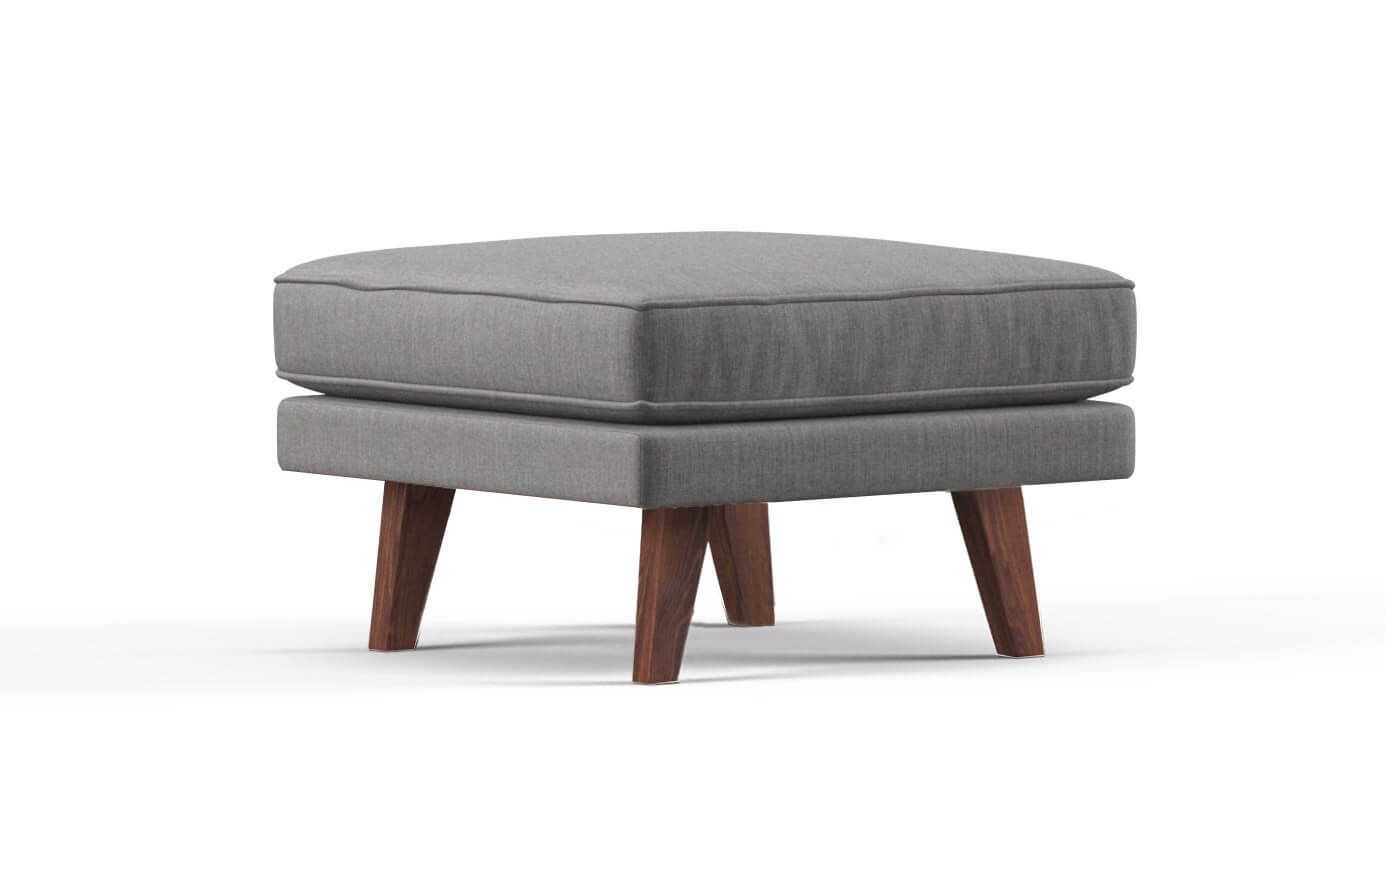 Shown in Smart Aluminum fabric with the walnut base